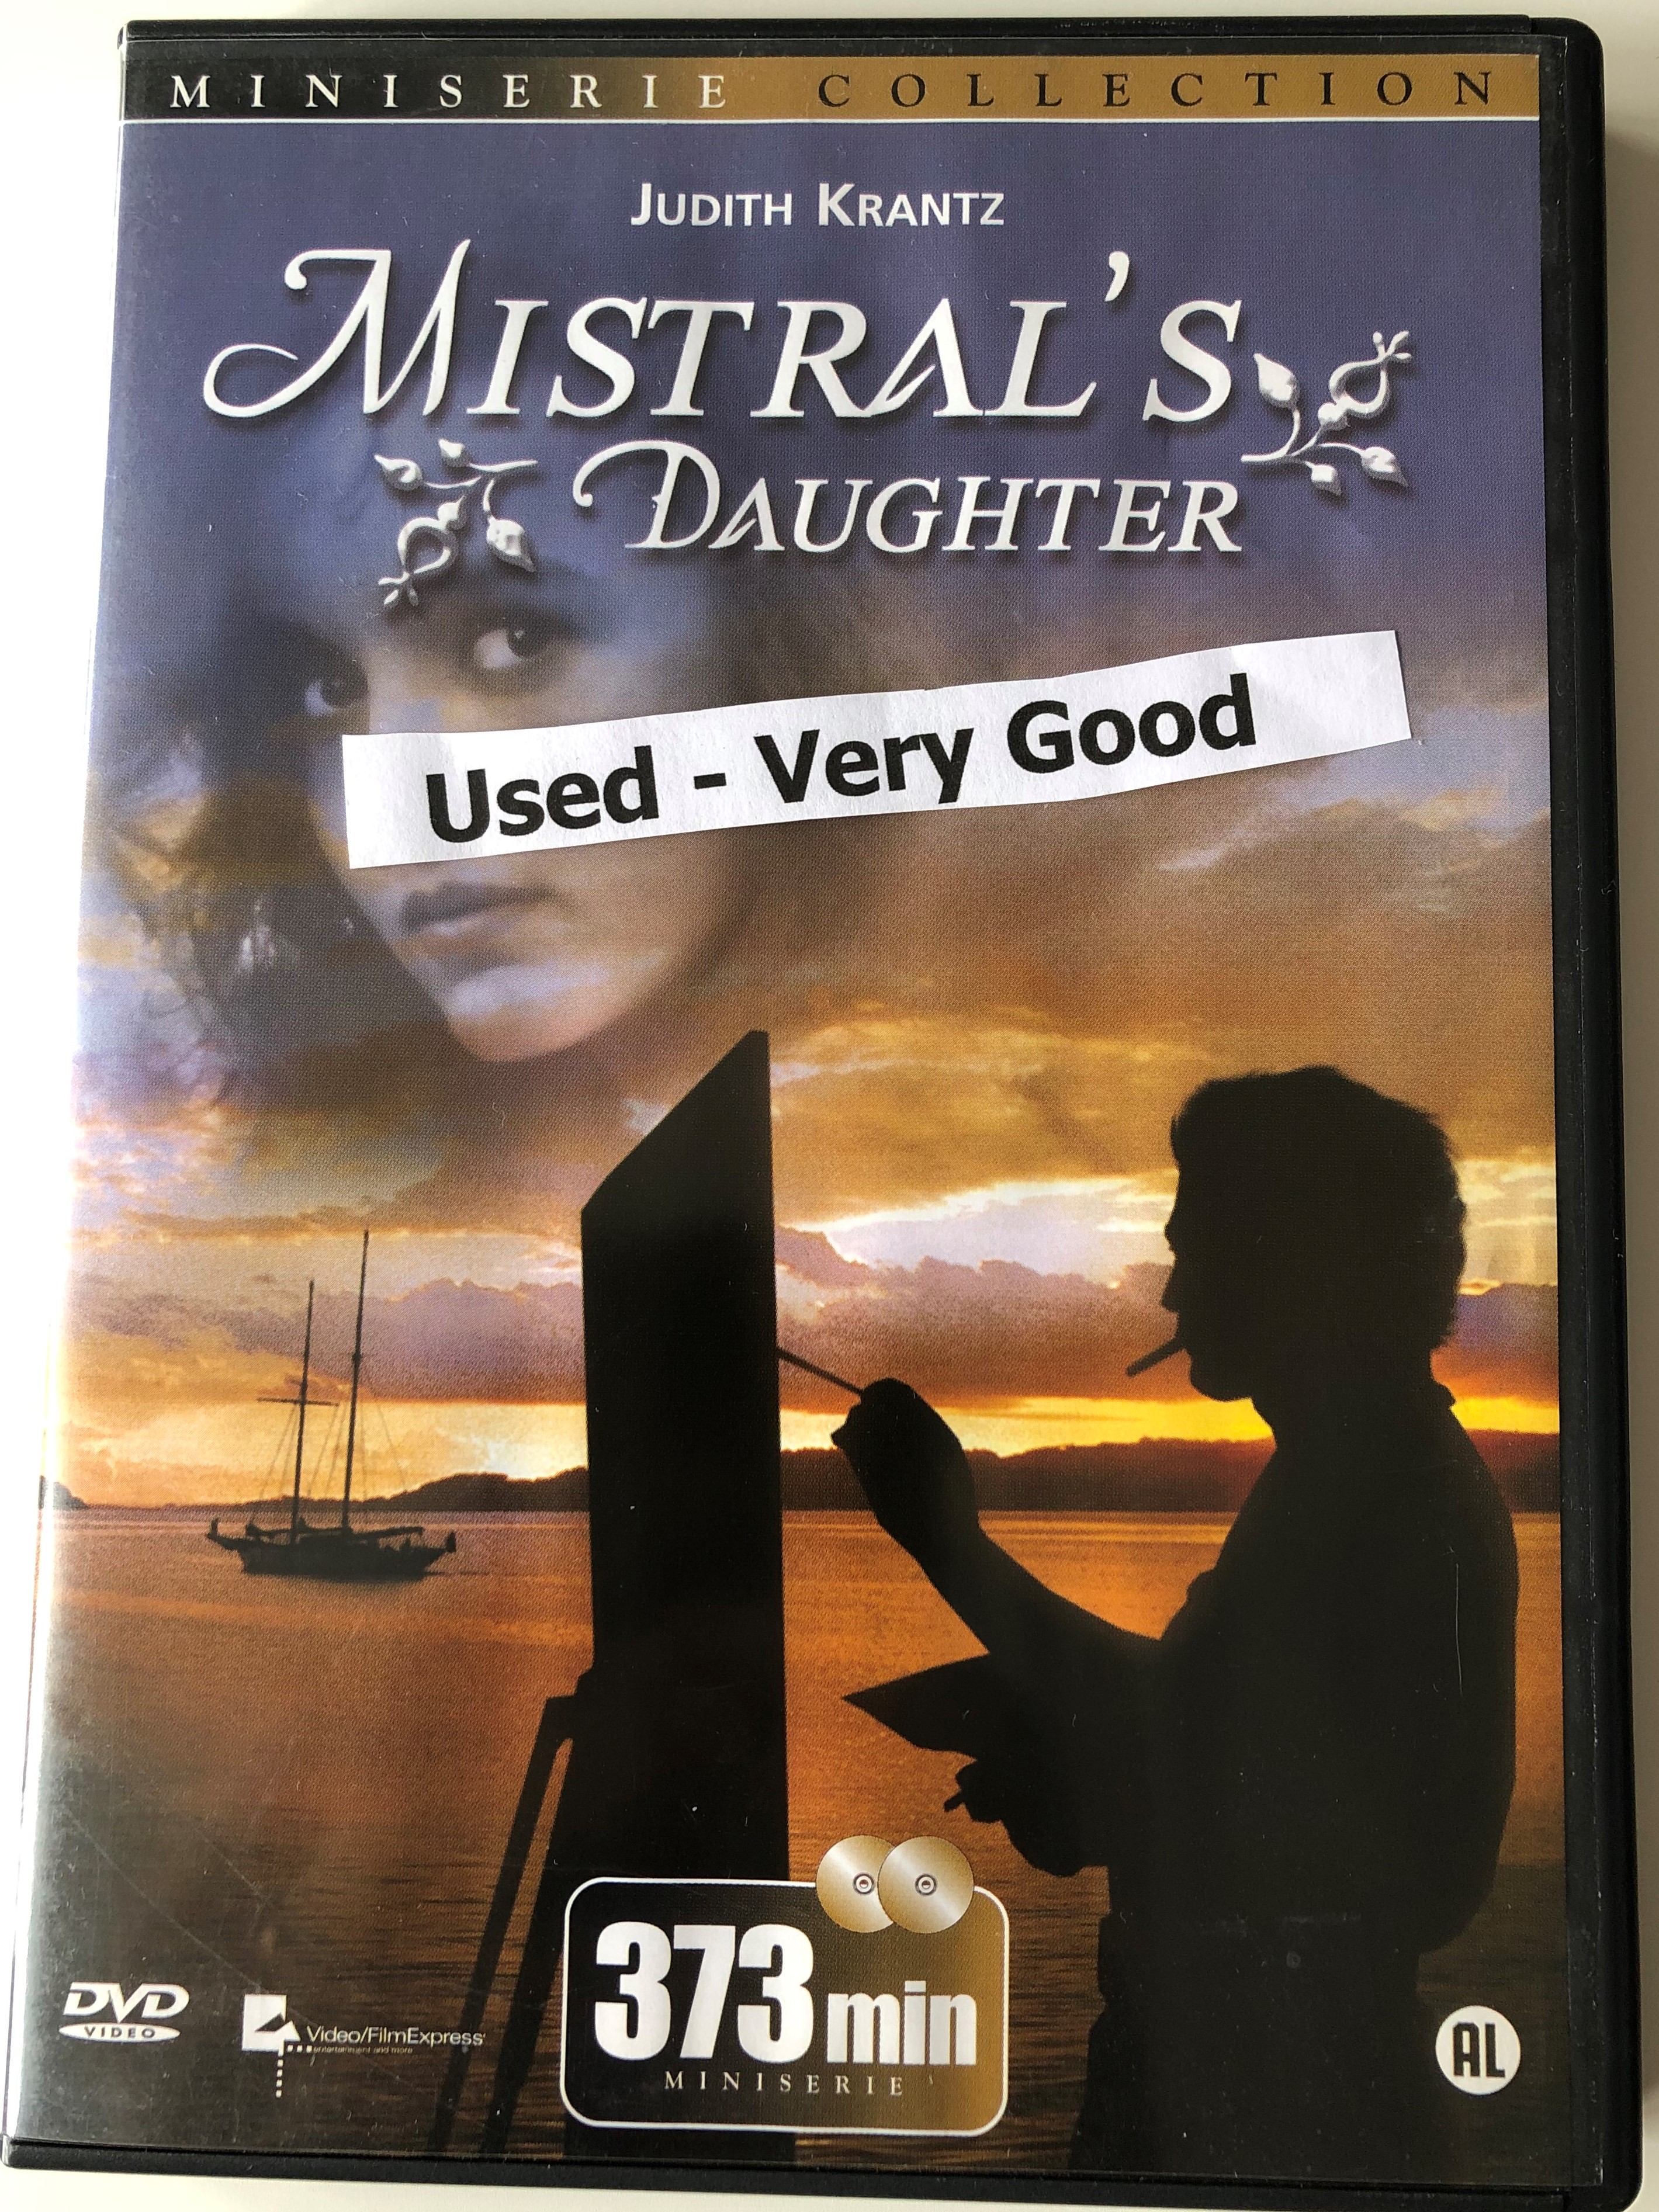 mistral-s-daughter-2xdvd-1984-american-television-miniseries-.jpg